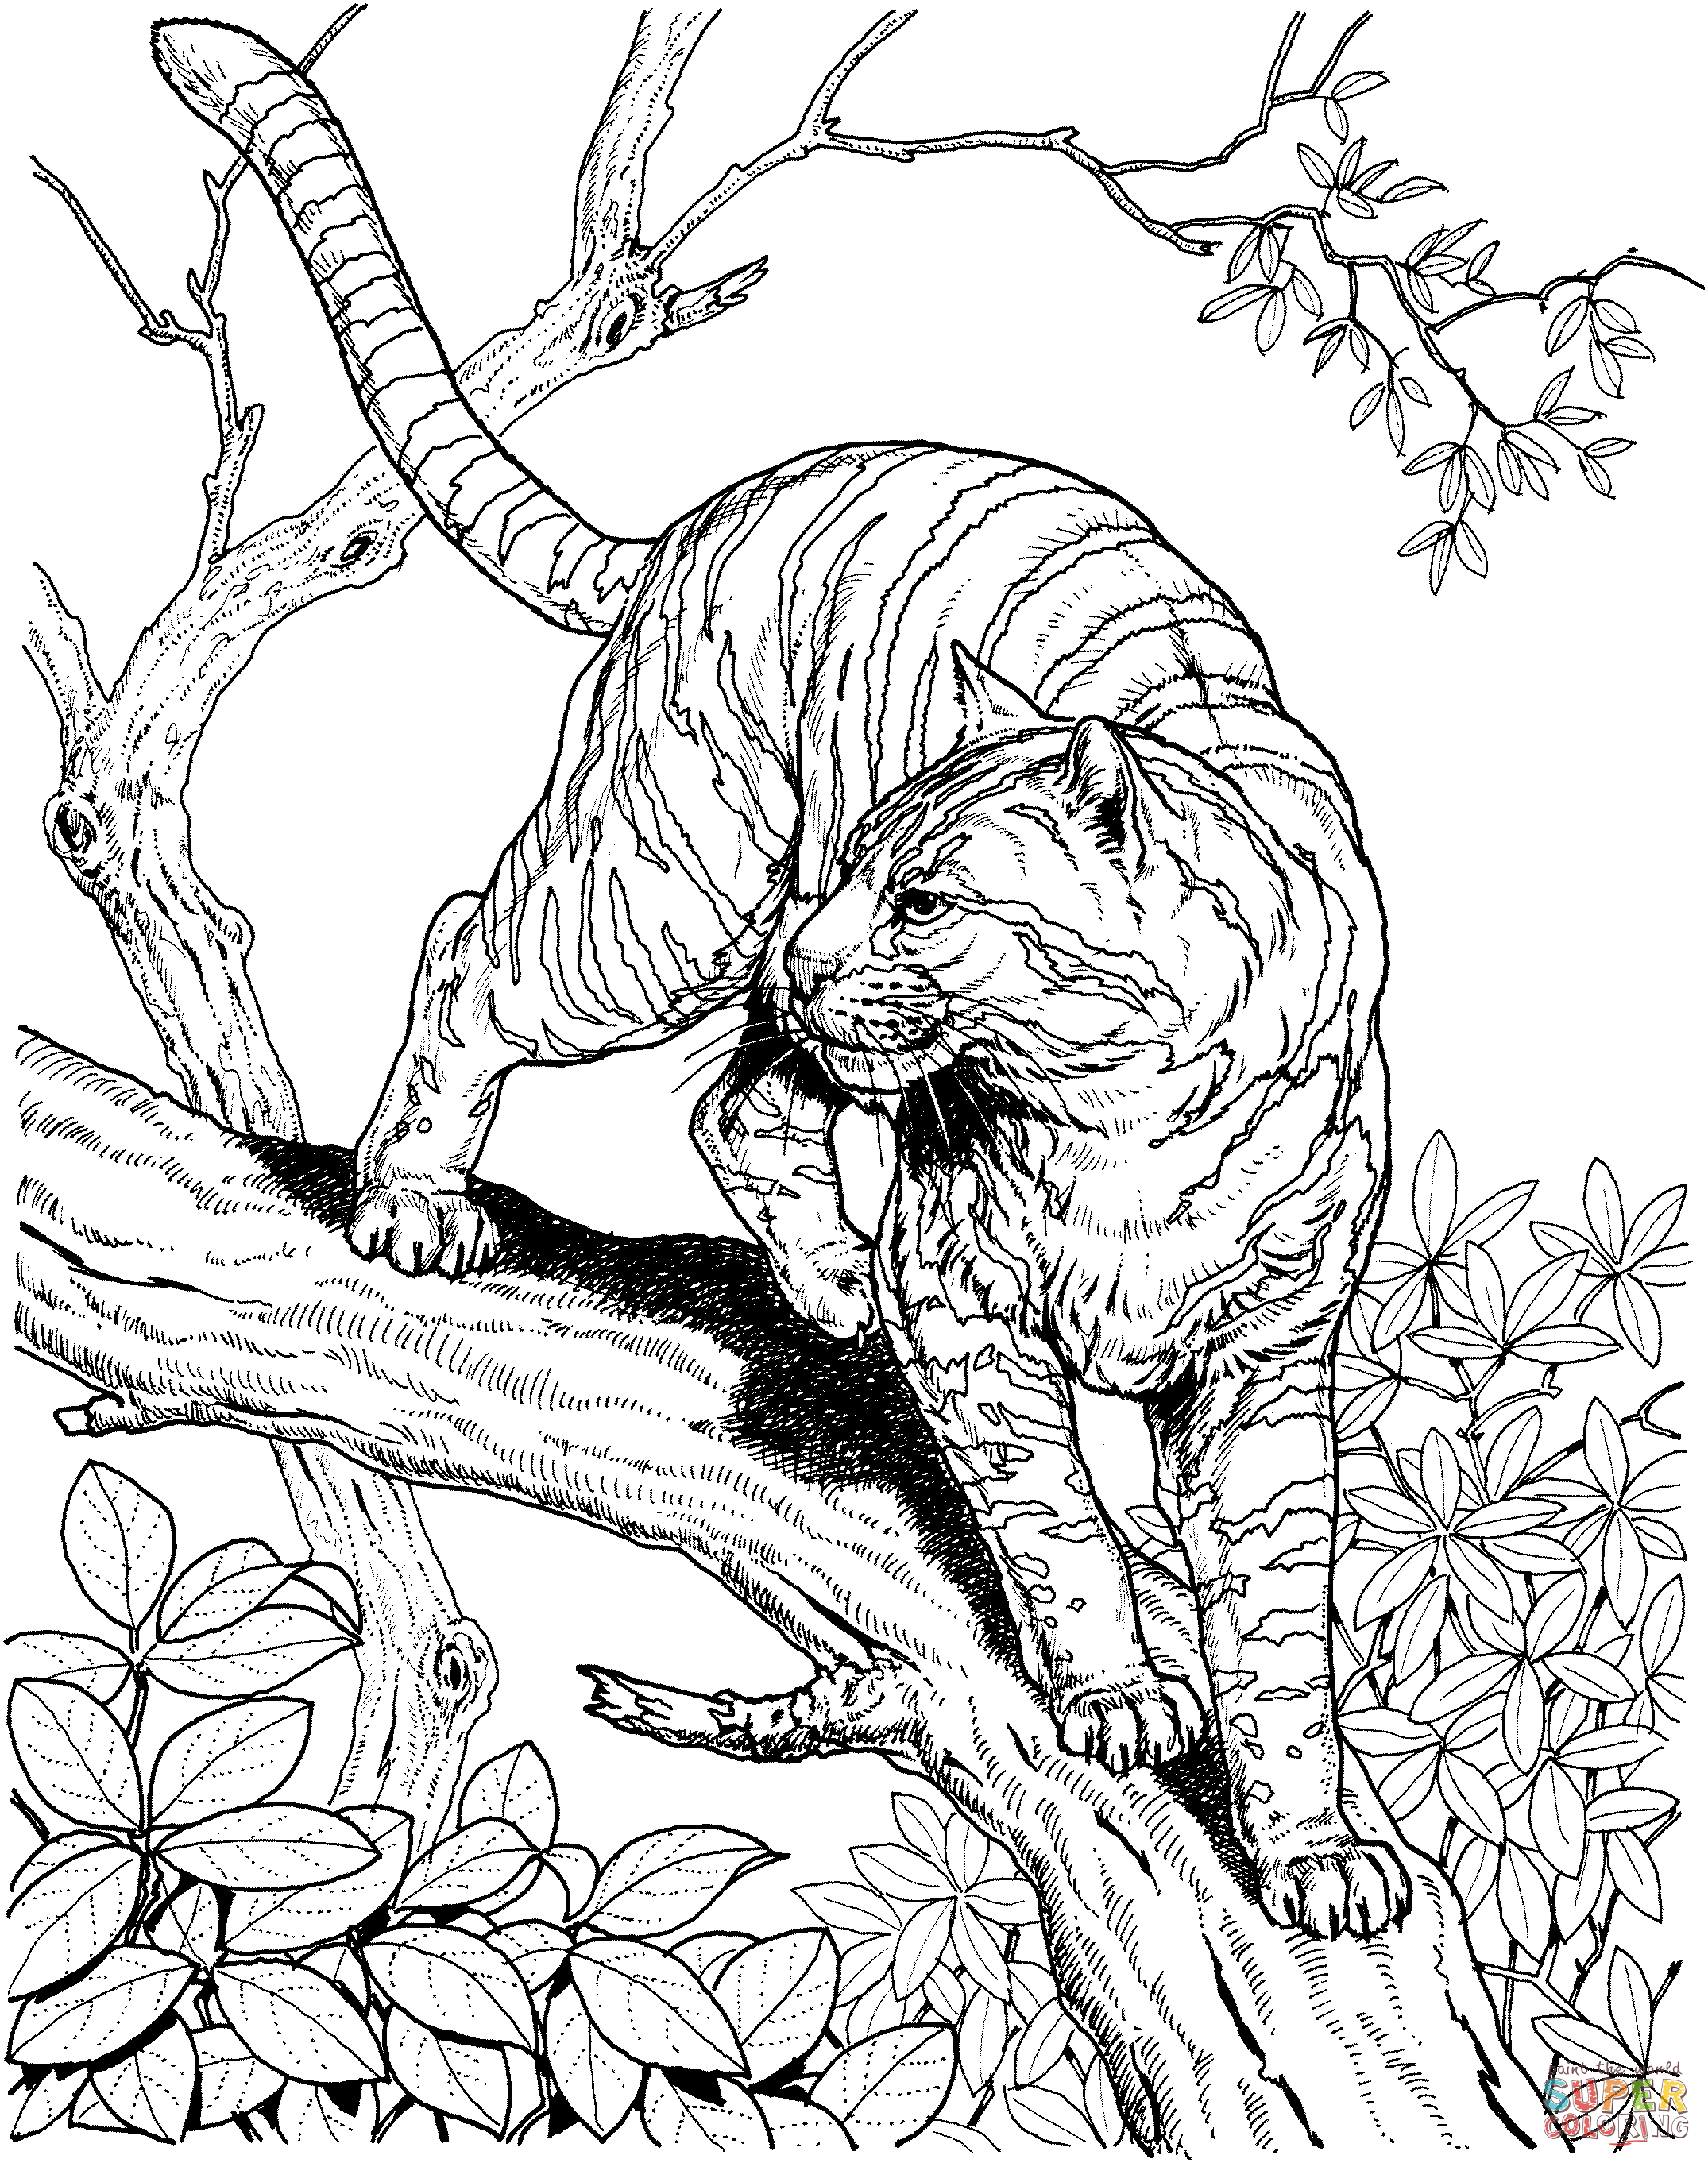 Tiiger coloring #6, Download drawings